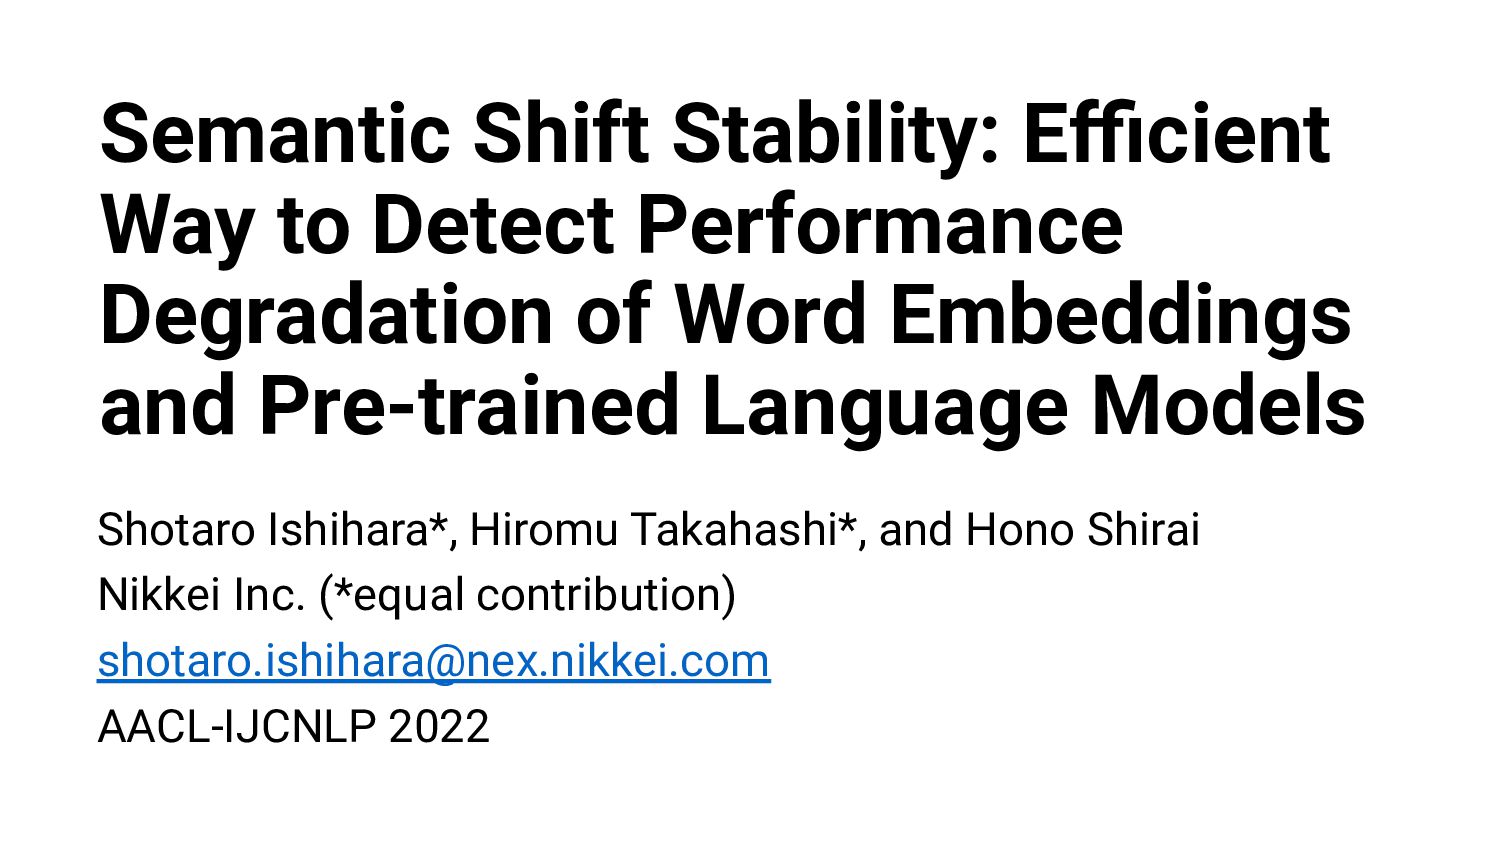 Semantic Shift Stability: Efficient Way to Detect Performance Degradation of Word Embeddings and Pre-trained Language Models